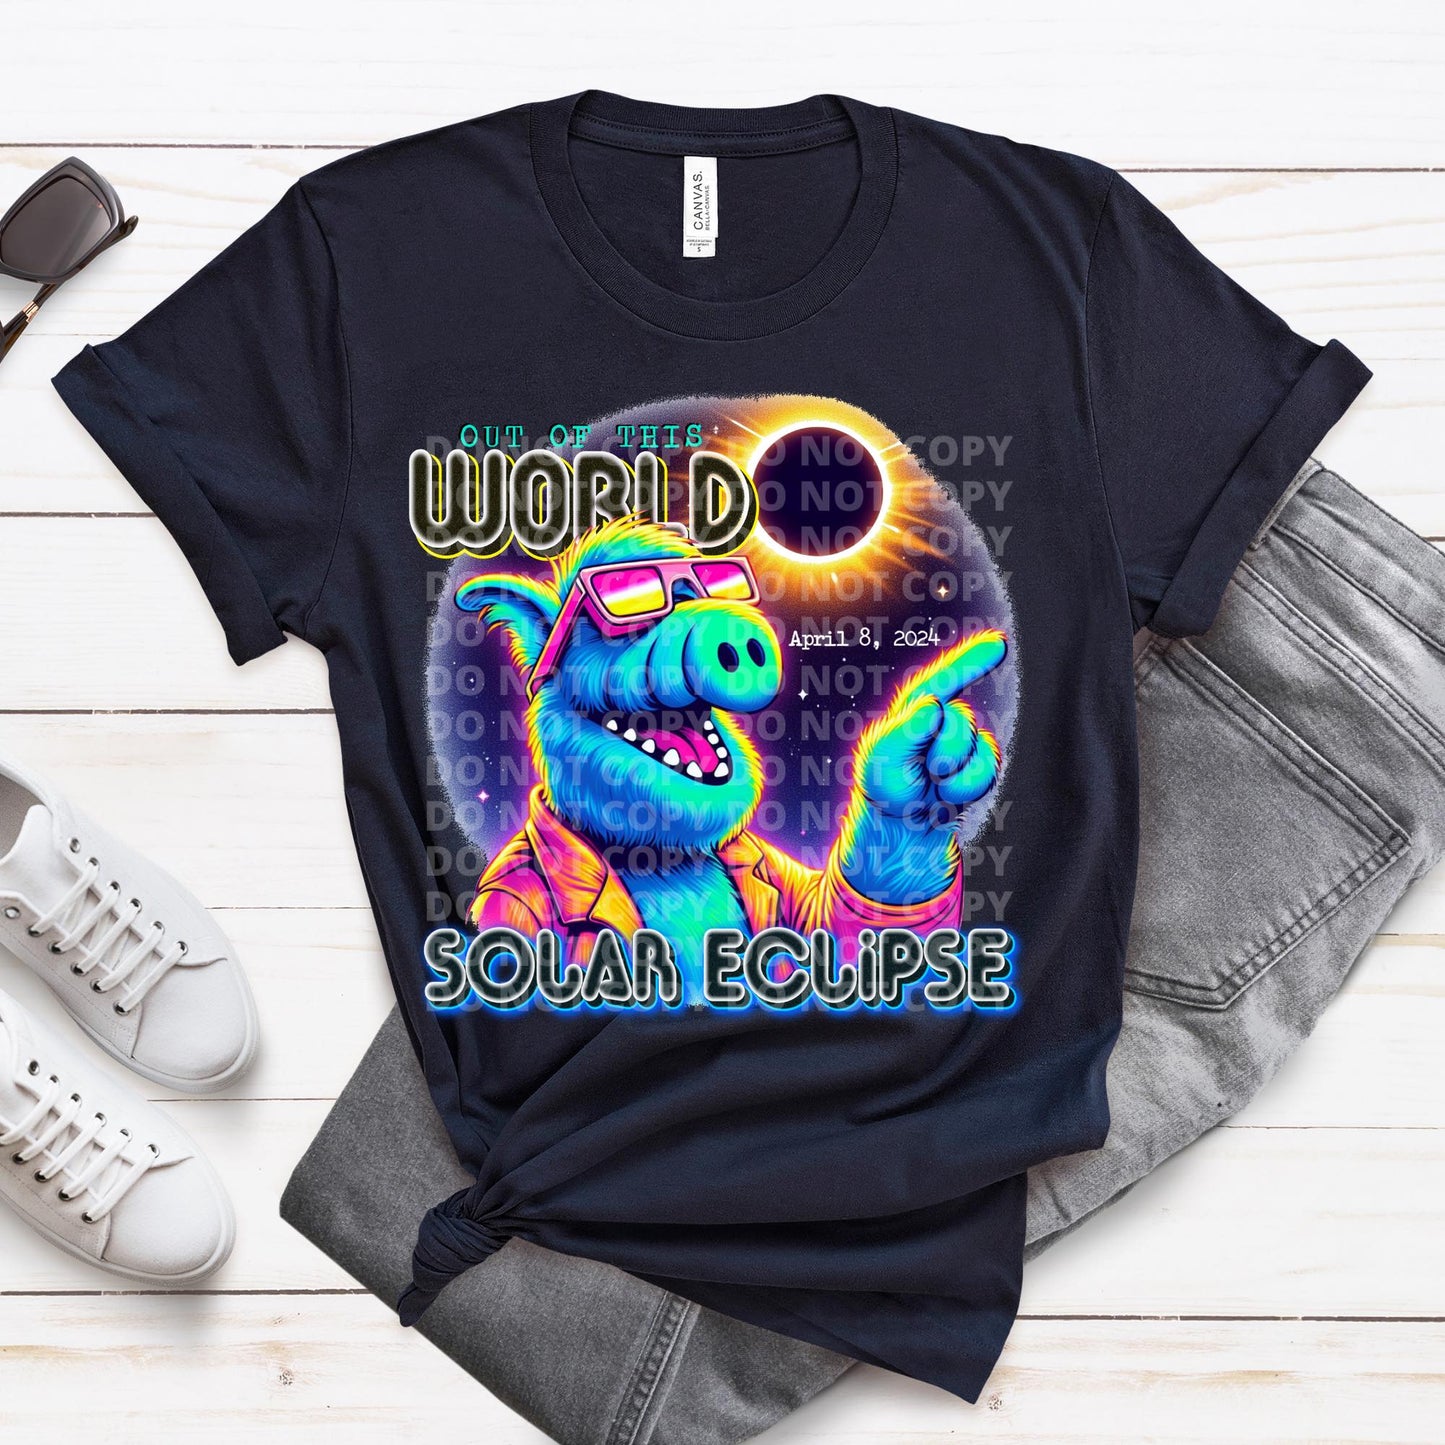 Out Of This World Solar Eclipse - Tee